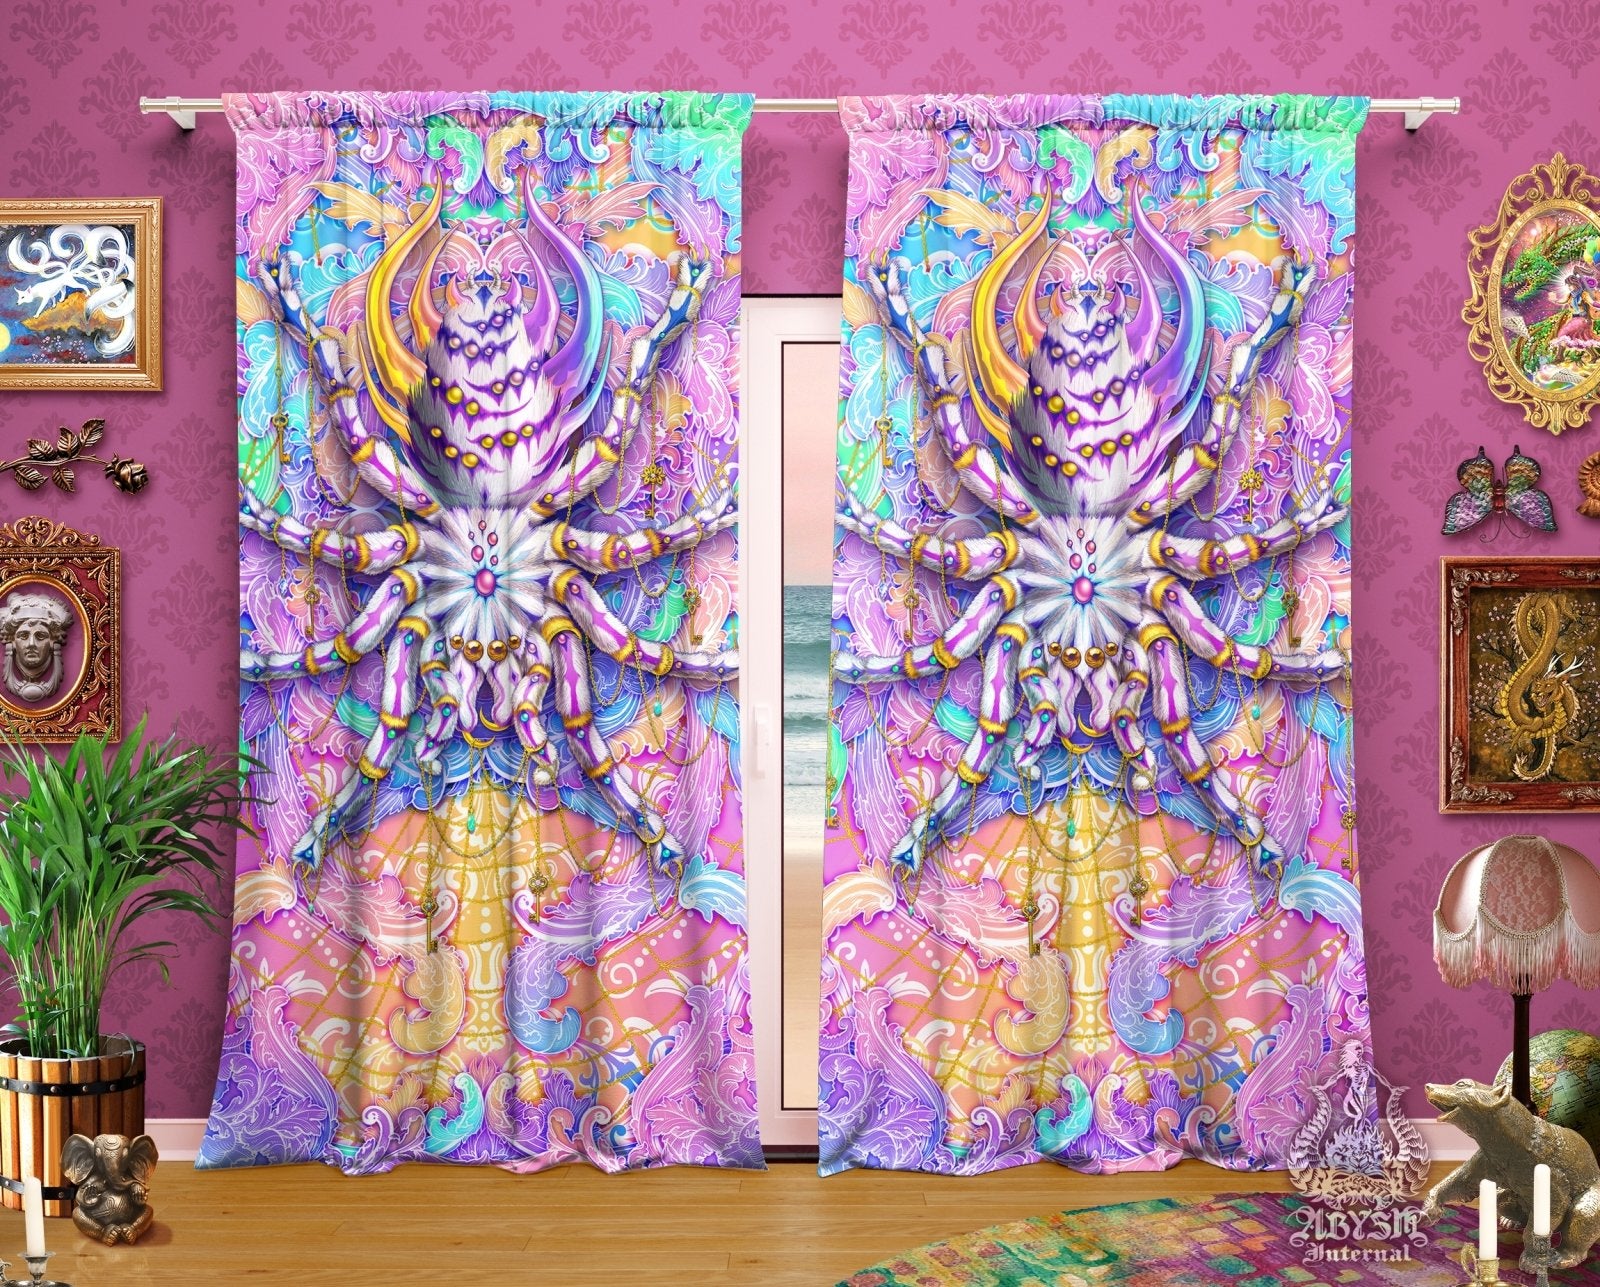 Asthetic Blackout Curtains, Long Window Panels, Psychedelic Art Print, Holographic Pastel Room Decor, Funky and Eclectic Home Decor - Tarantula Spider - Abysm Internal